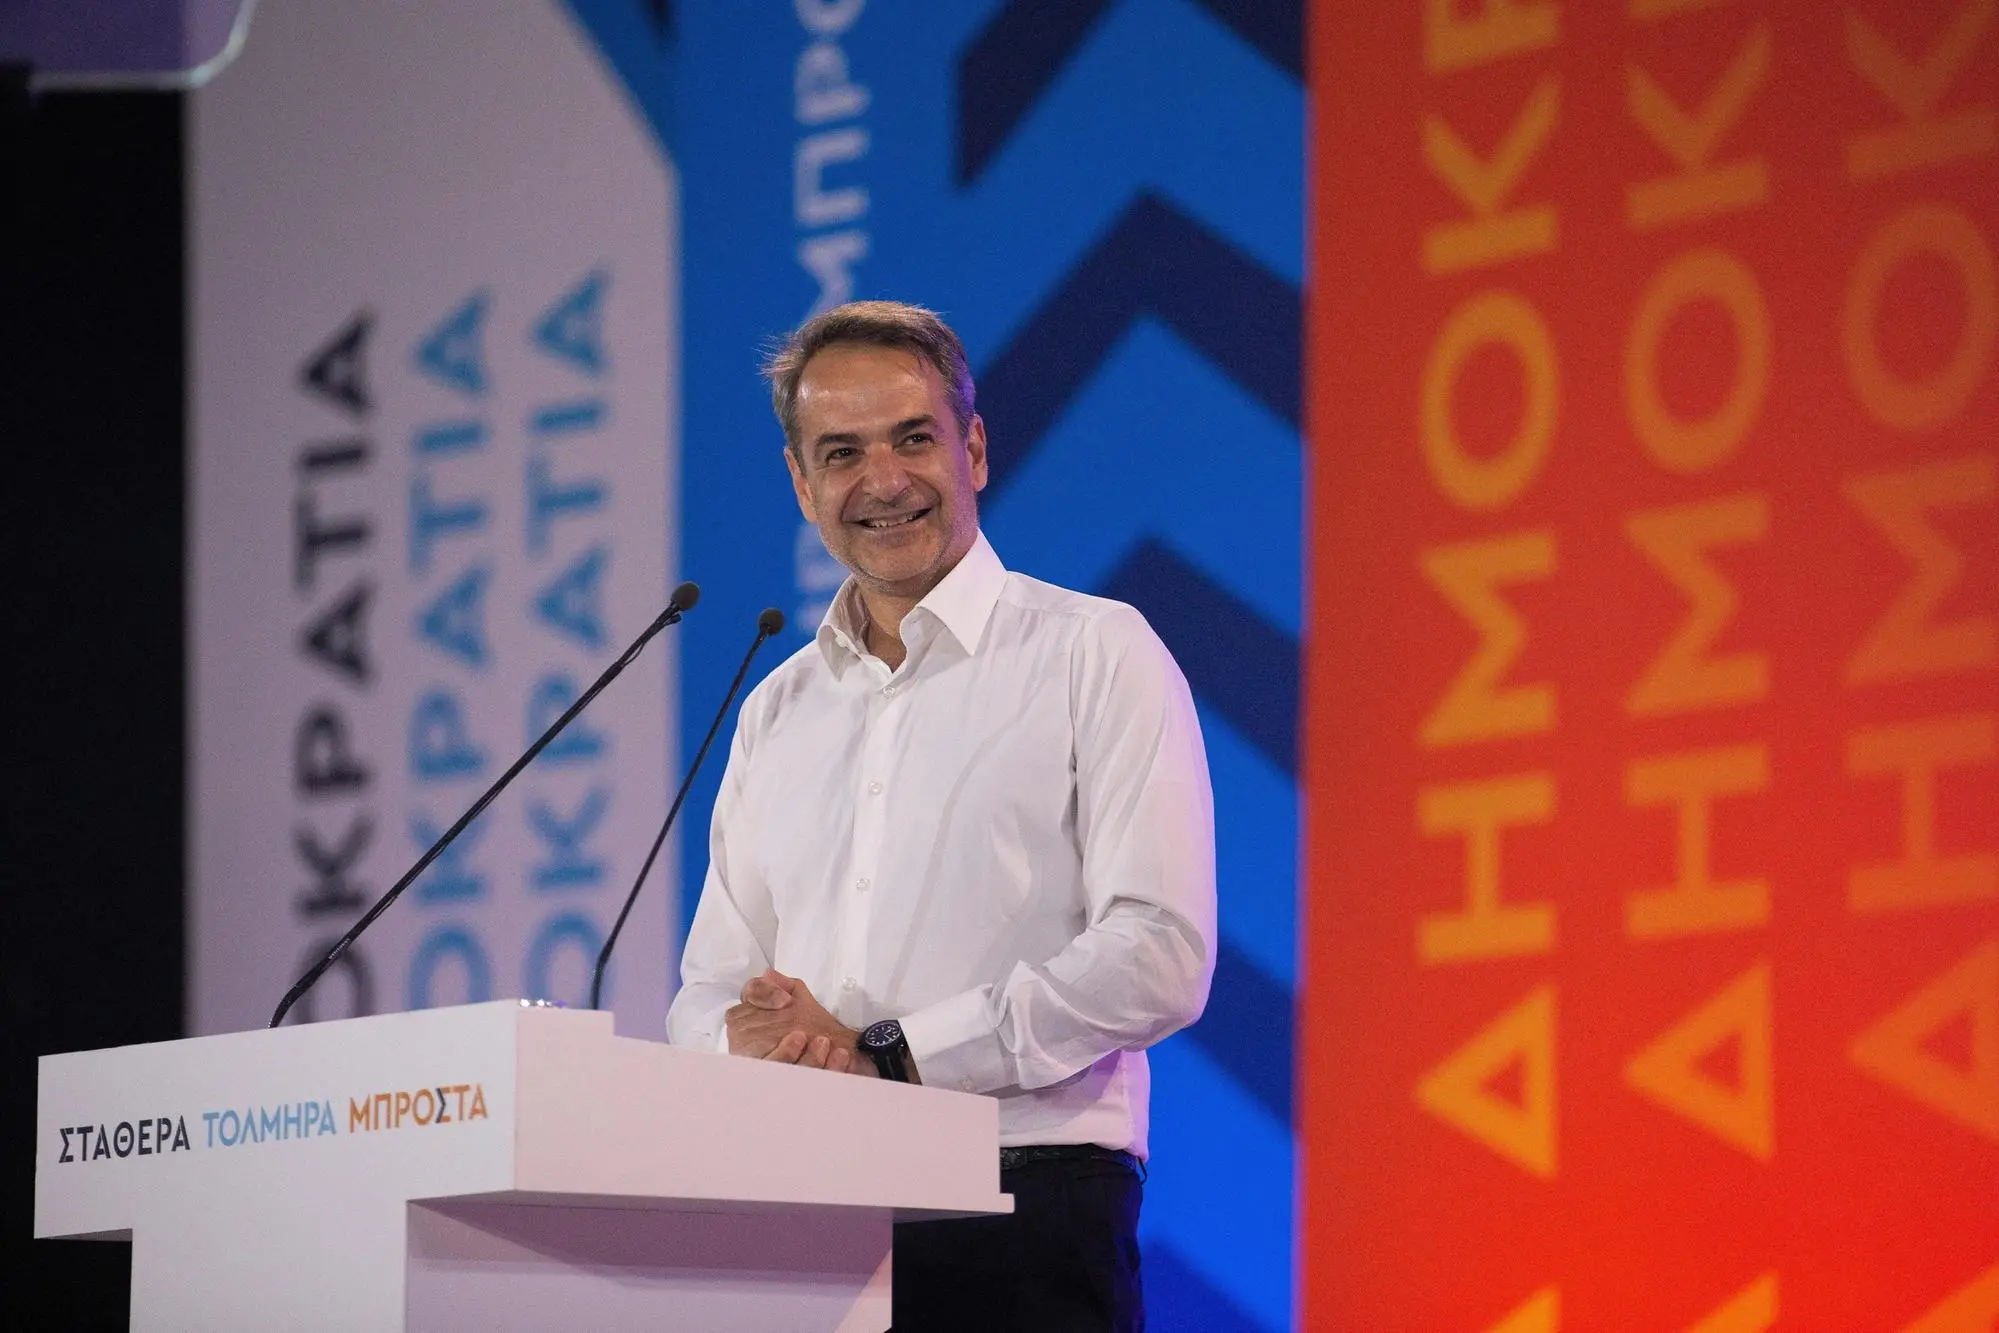 epa10637451 Greek Prime Minister and leader of New Dimokratia Kyriakos Mitsotakis speaks during his pre-election rally, in Thessaloniki, Greece, 18 May 2023. Greece will hold their parliamentary elections on 21 May. EPA/ACHILLEAS CHIRAS